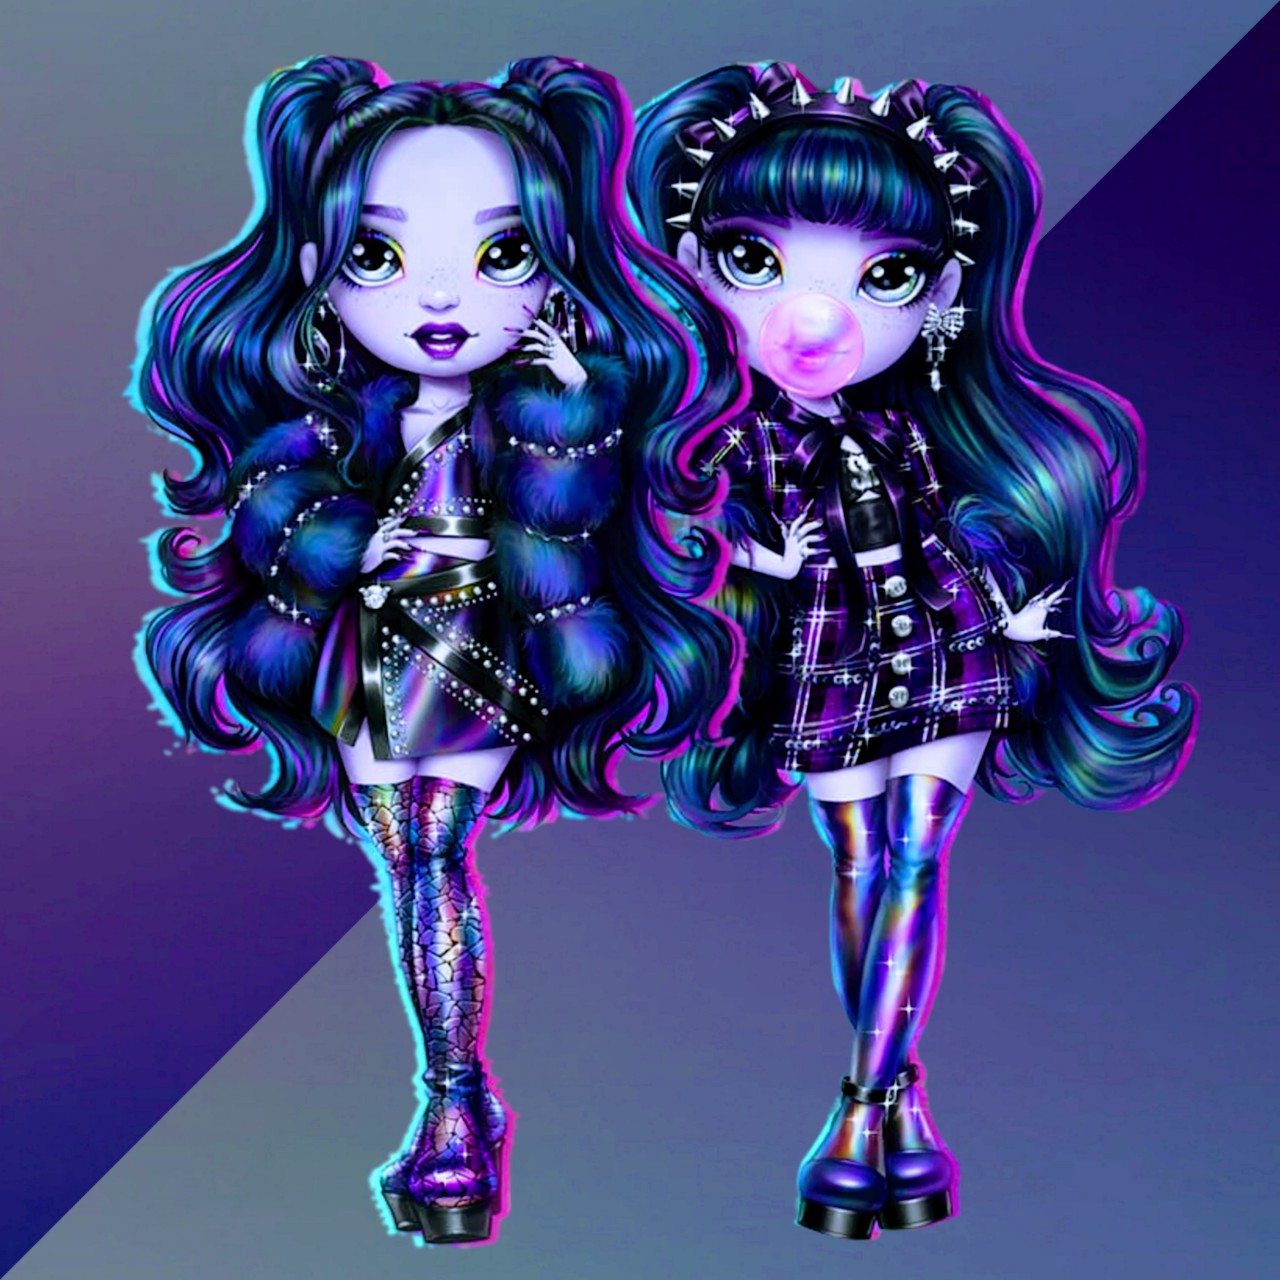 Shadow High IconsLike and/or reblog if you save/use #rainbow high#shadow high#storm twins#naomi storm#veronica storm#sparkly#glitter#icons#square icons#circle icons #icons by me